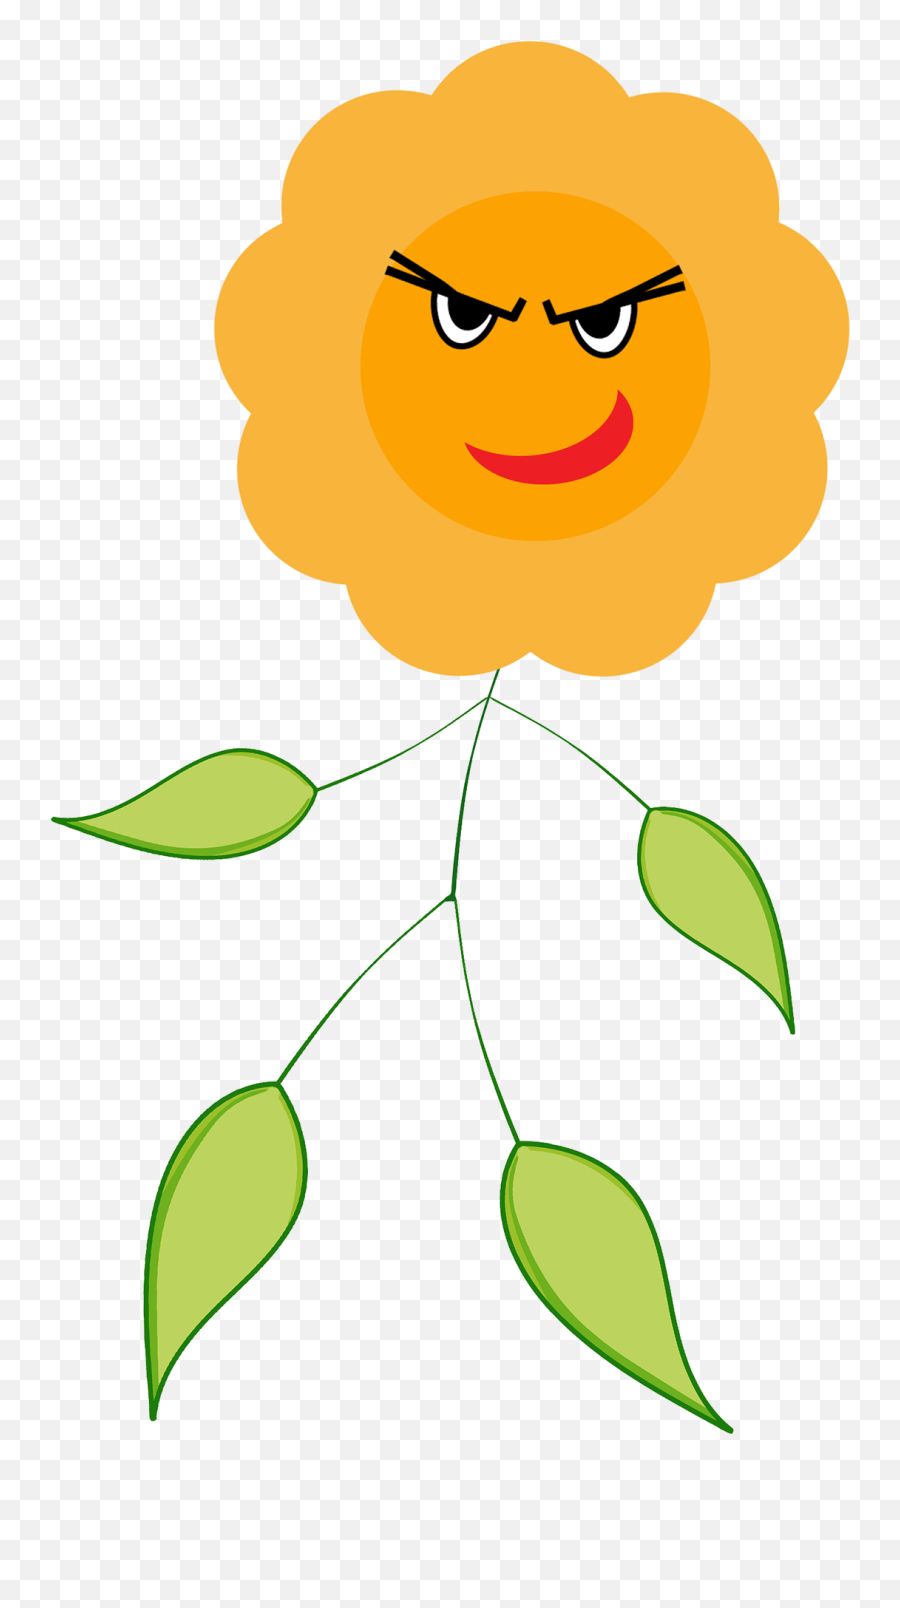 Angry Flower - Flowey Angry And Suflower Emoji,Angry Flower Emoticon